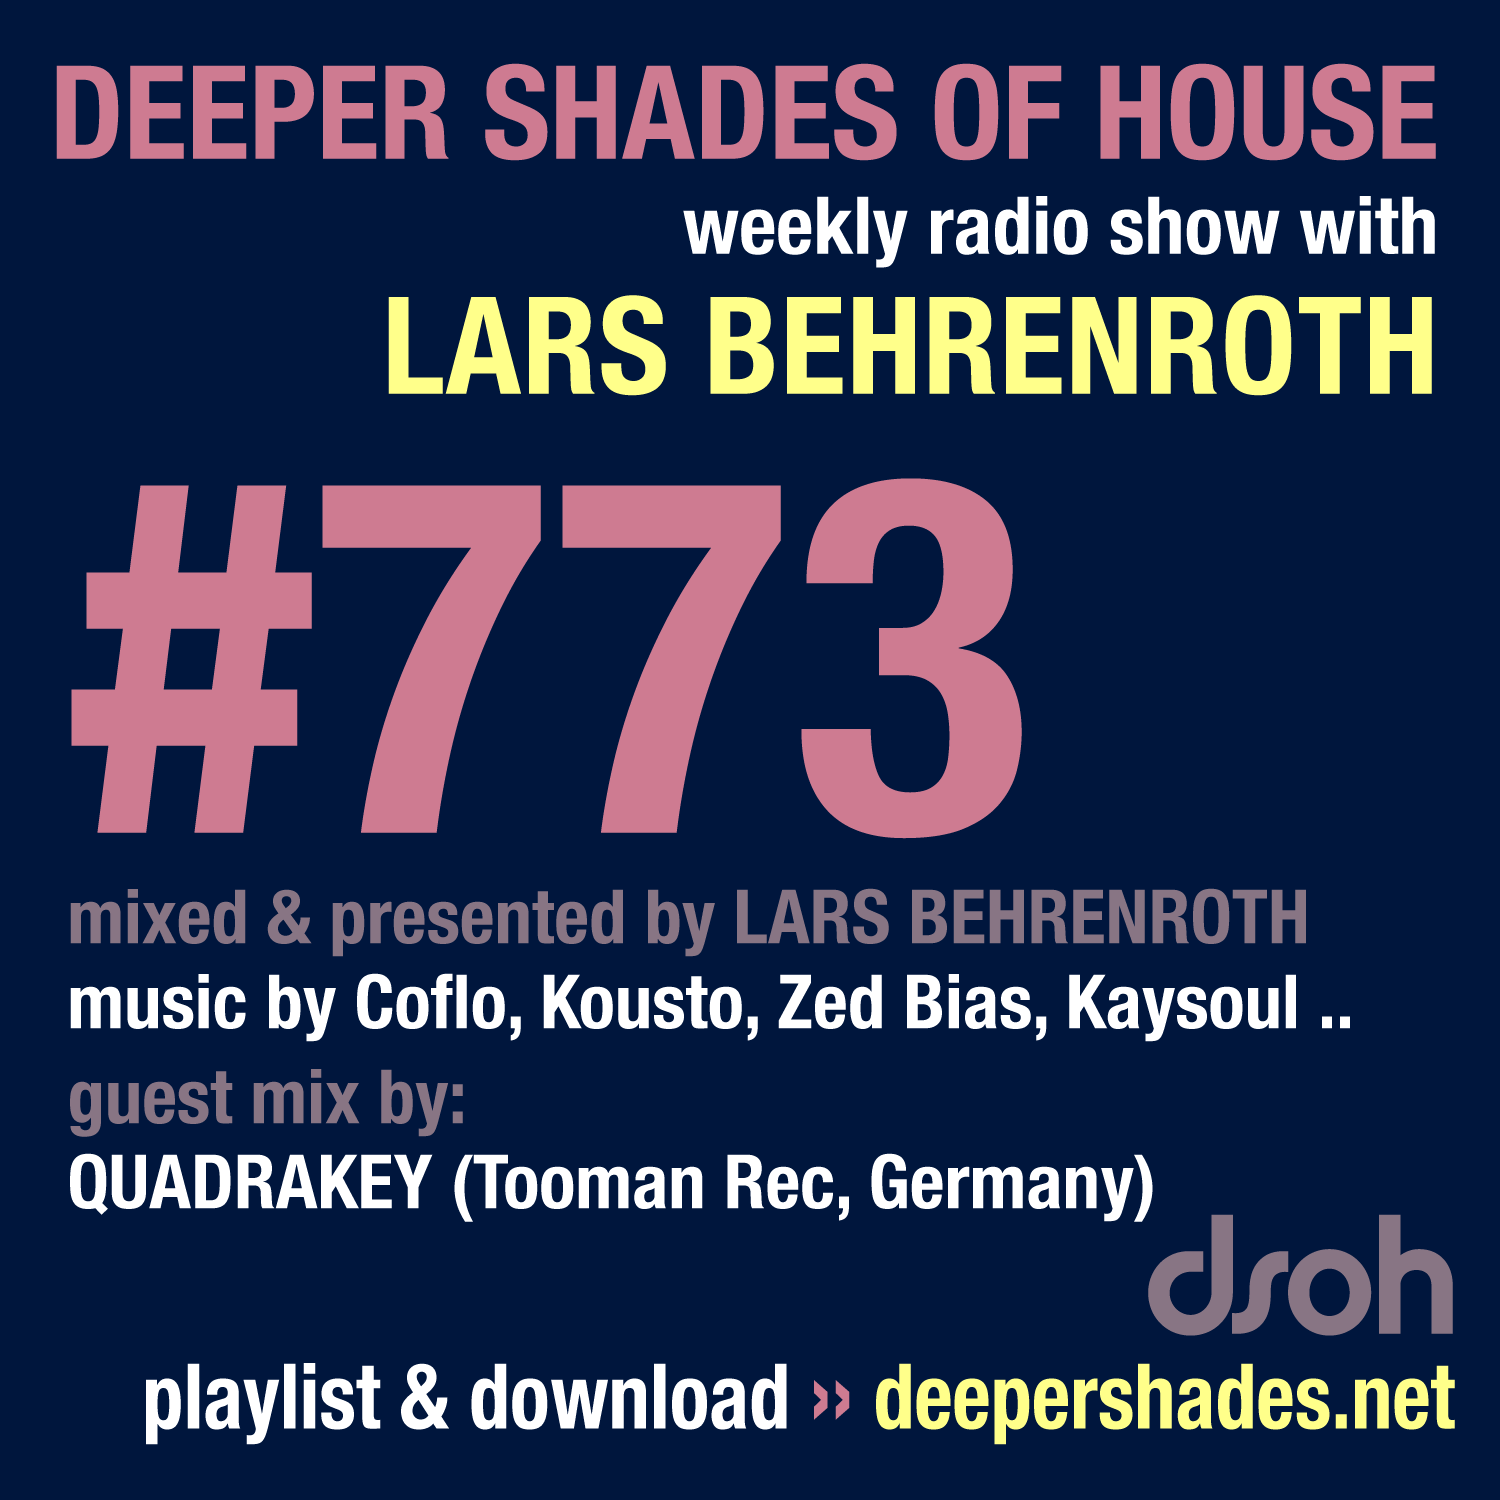 Deeper Shades Of House 773